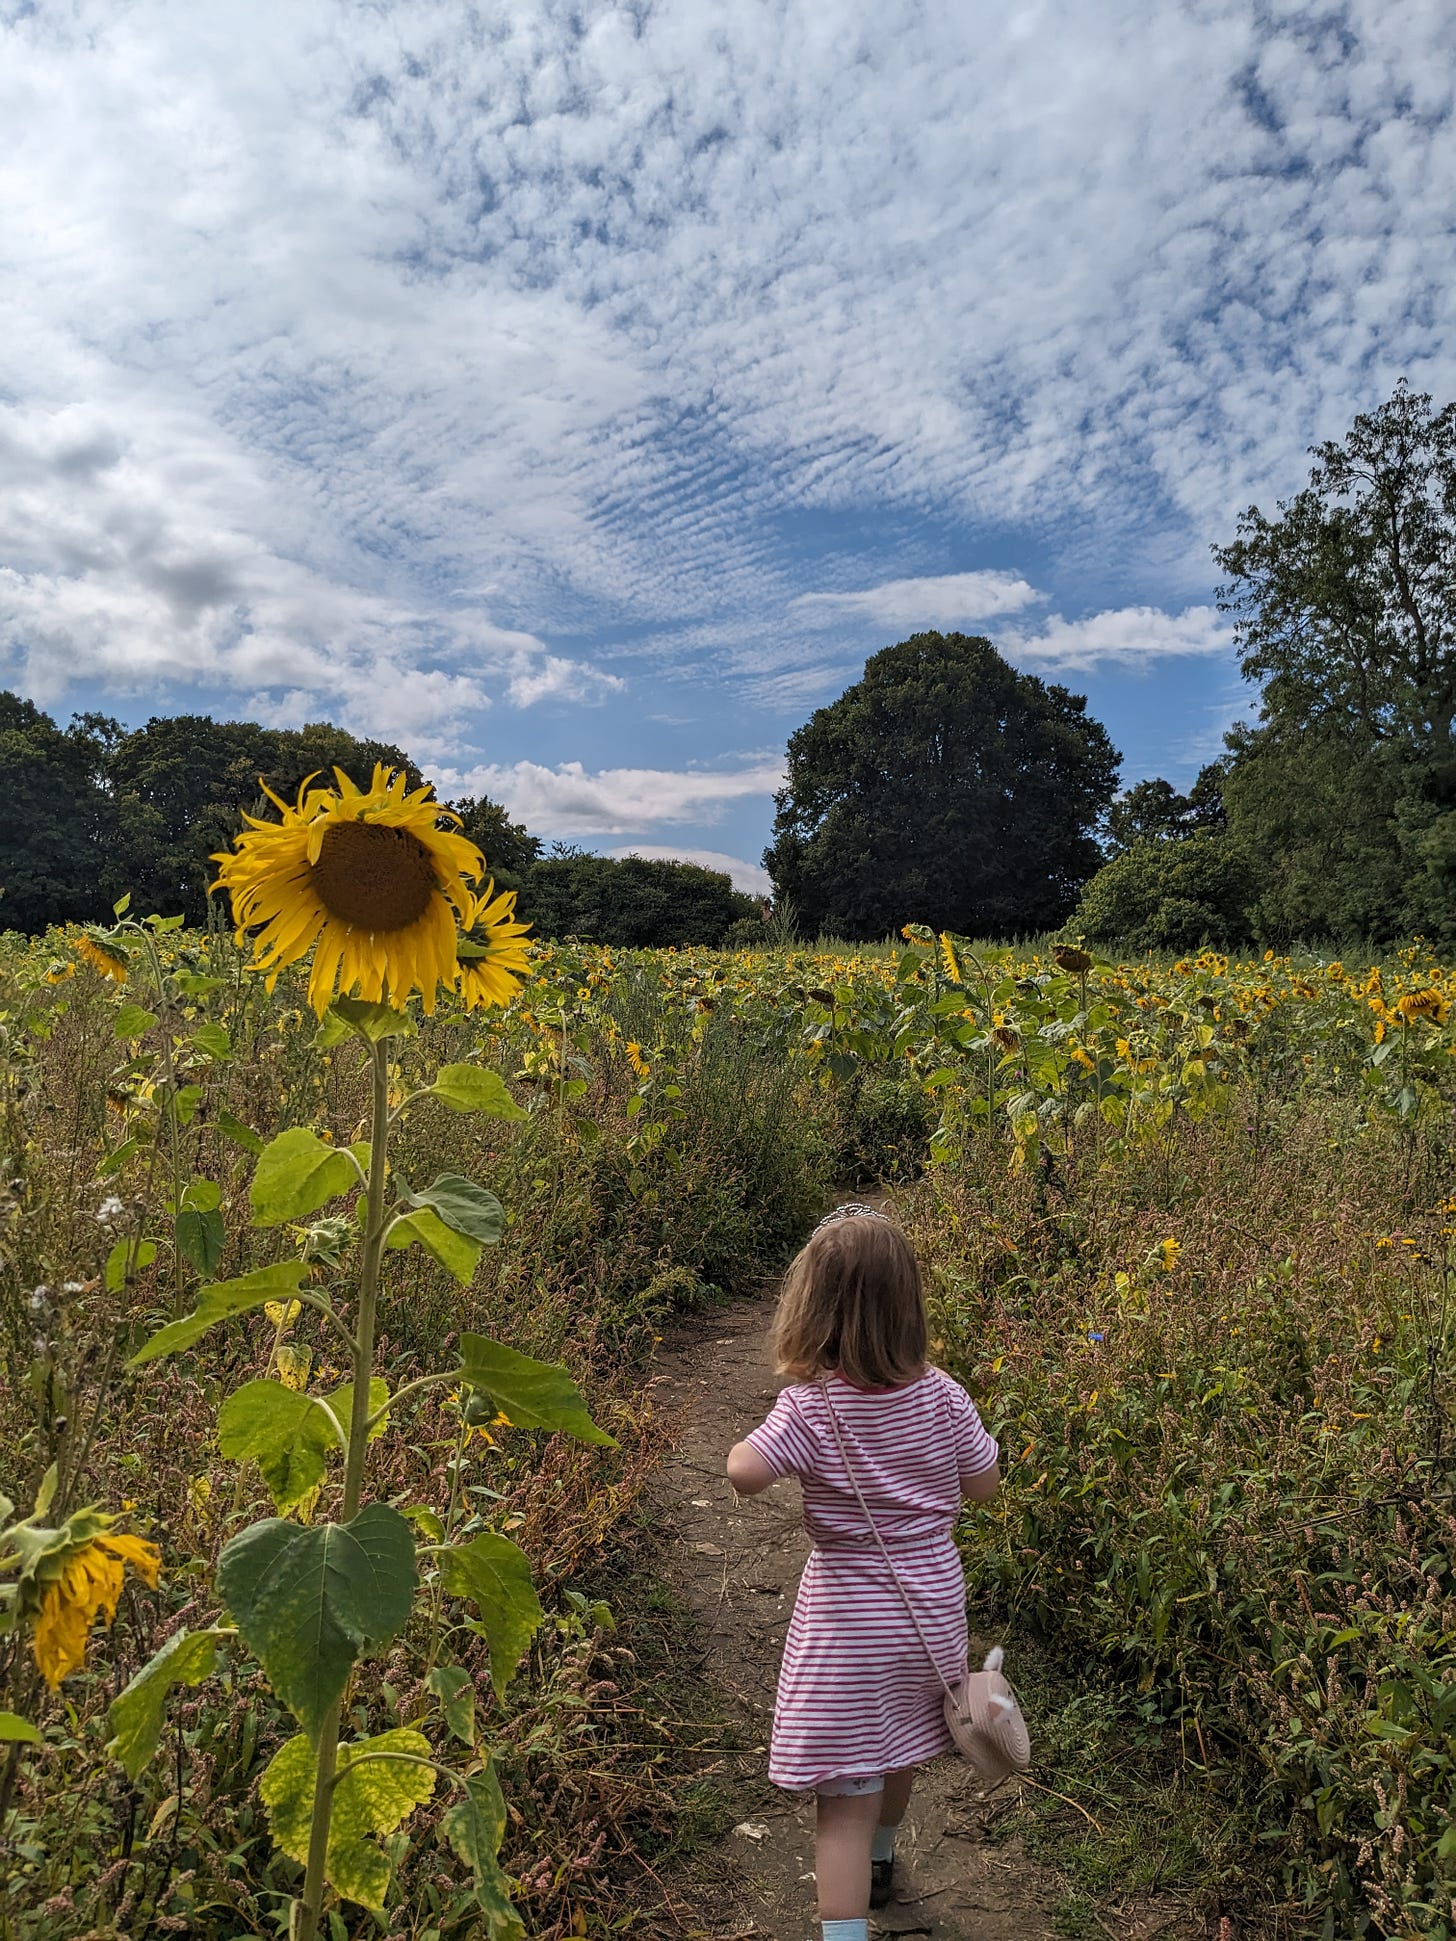 A young girl wearing a pink and white dressed walks away from the camera into a field of wilting sunflowers. The sky is blue with rippled clouds.